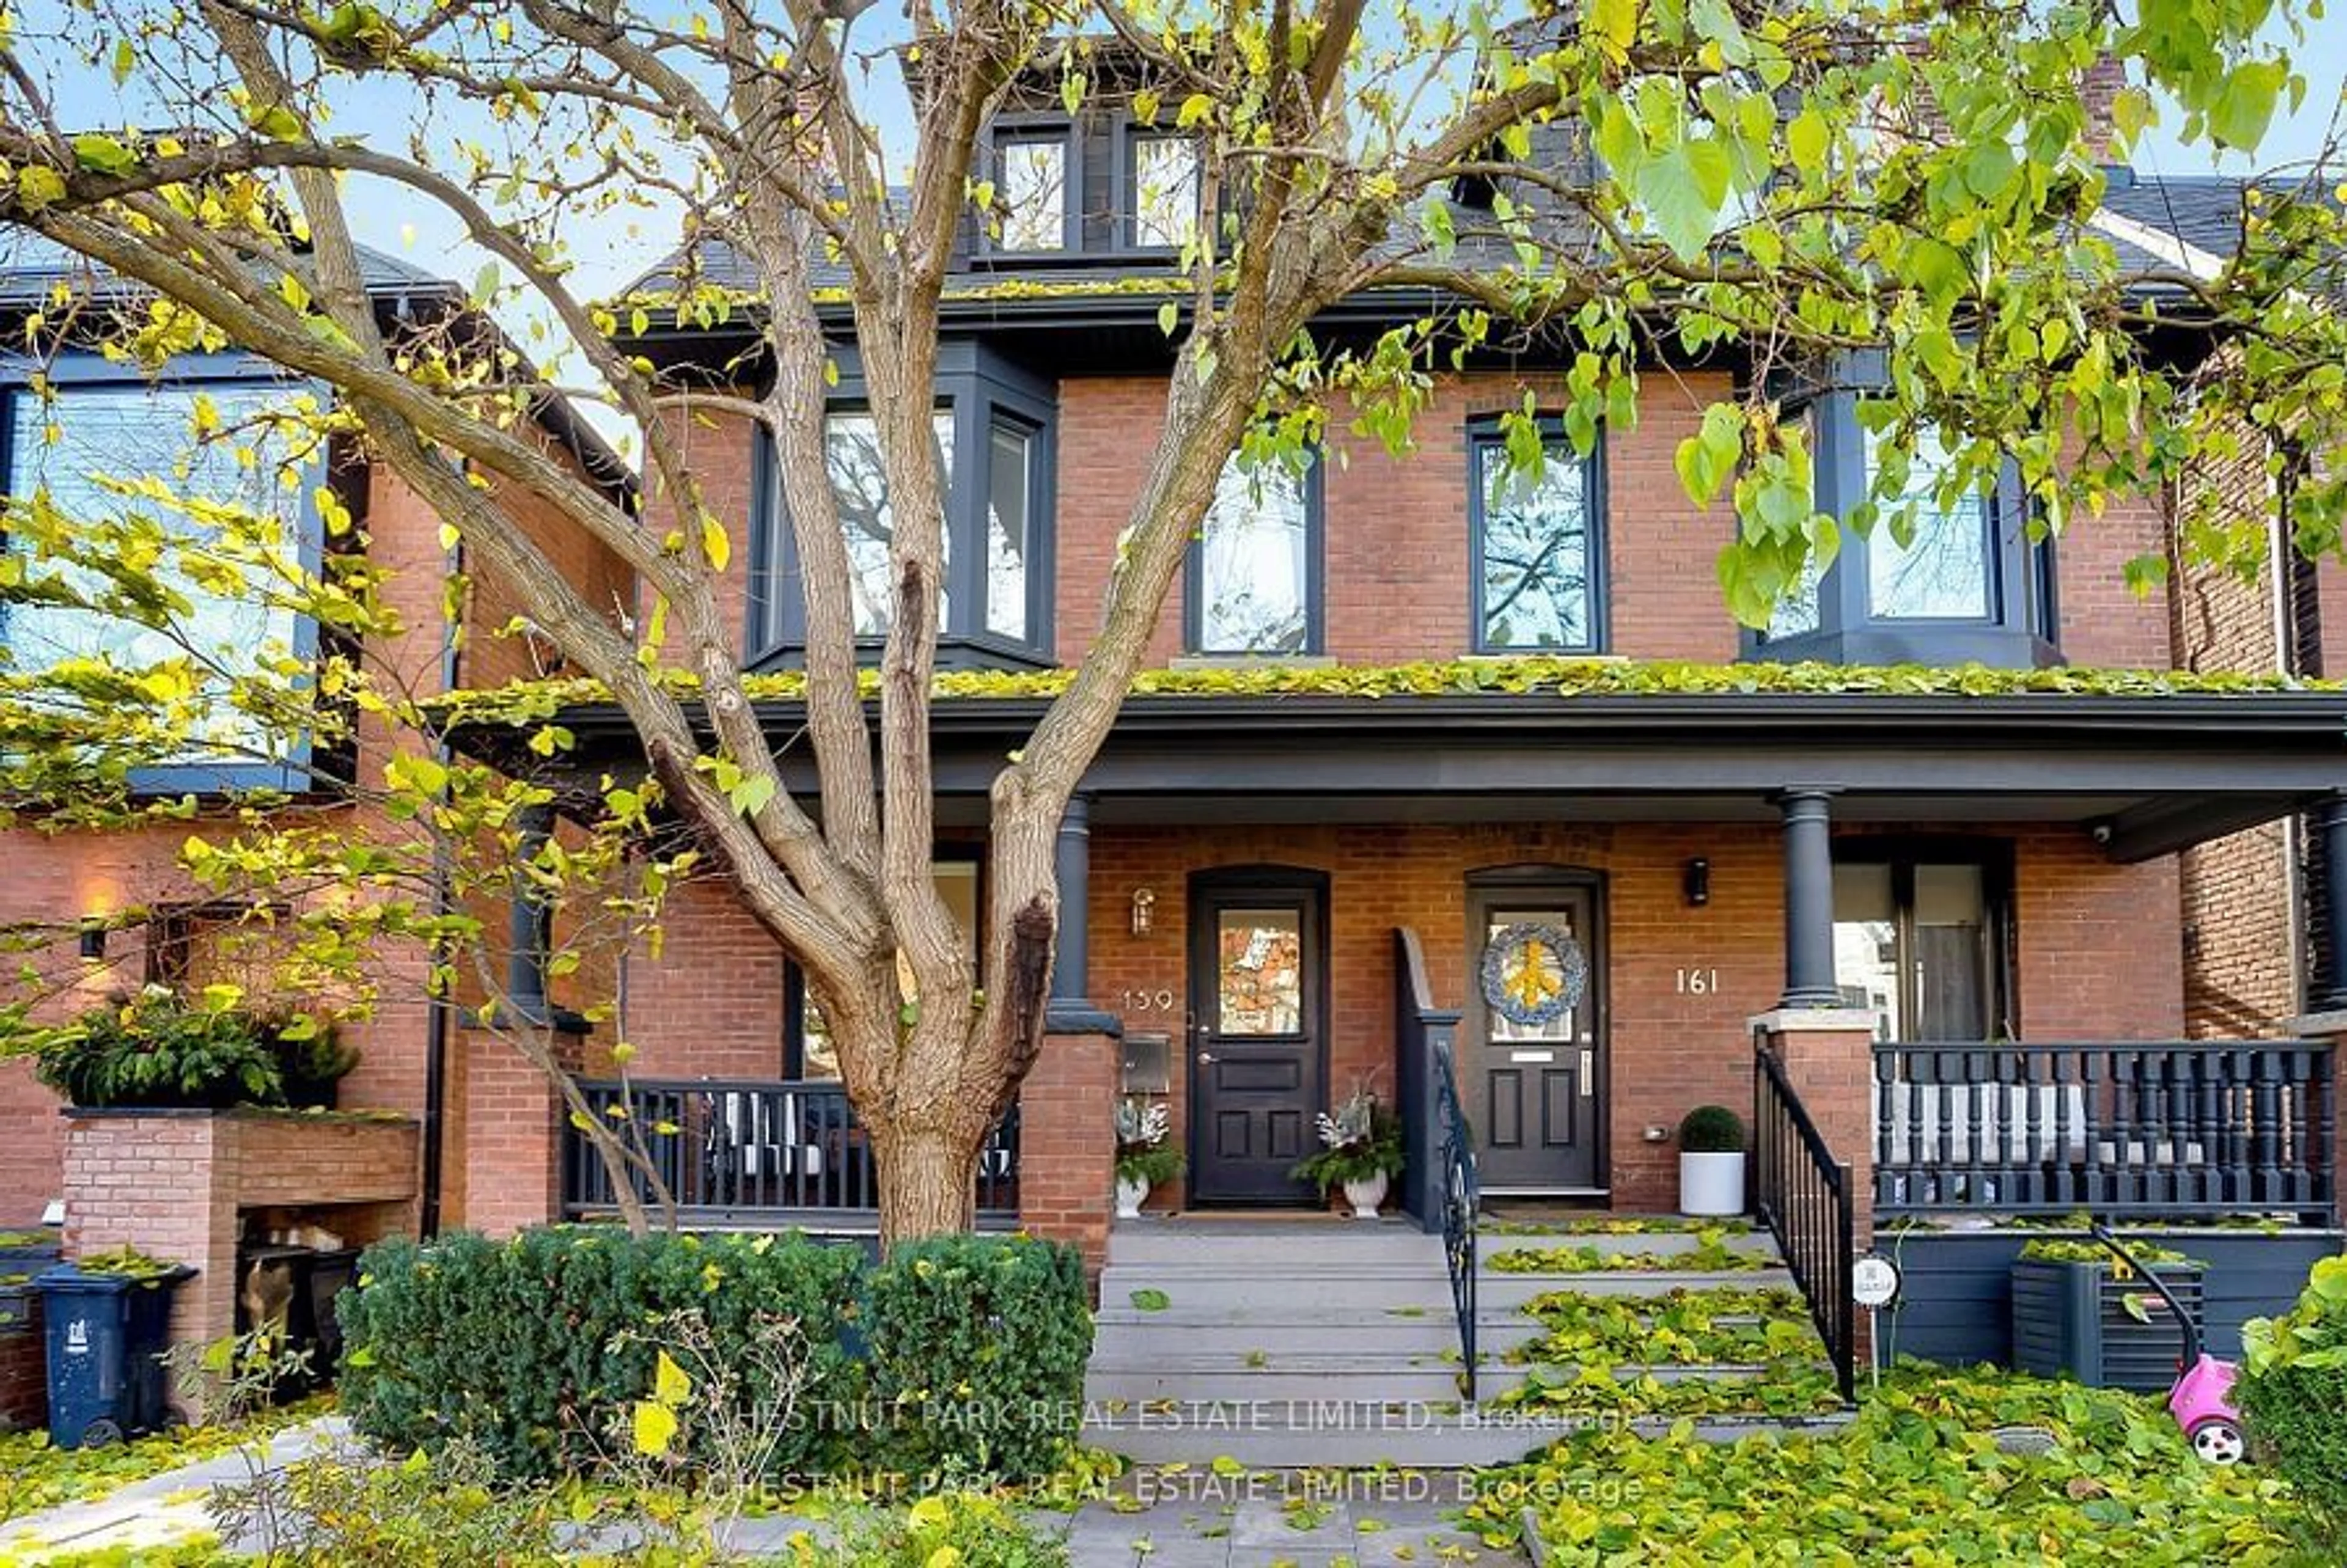 Home with brick exterior material for 159 Macpherson Ave, Toronto Ontario M5R 1W9